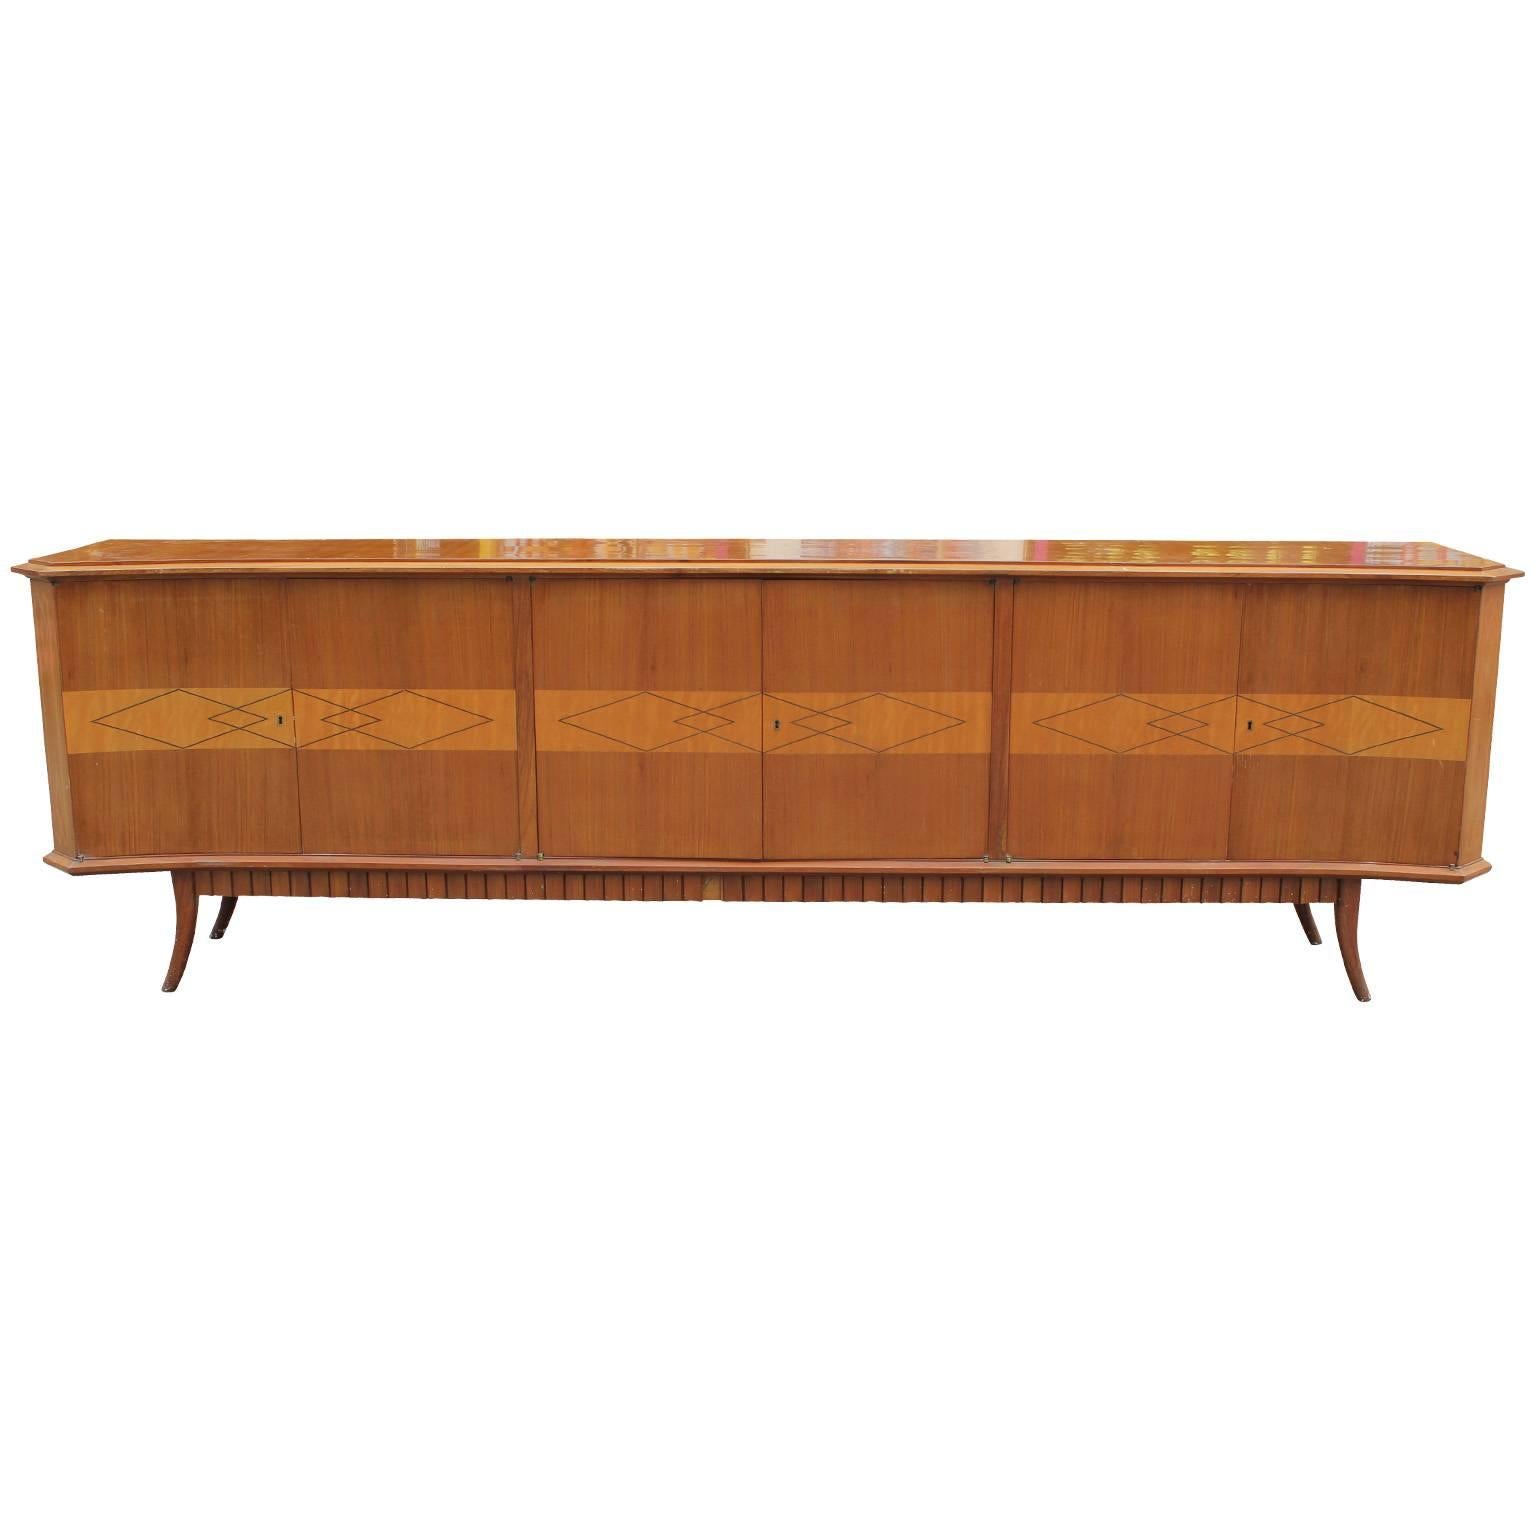 Fabulous, long Italian sideboard or credenza. Piece has incredible detailing. Front of sideboard is inlaid with an interlocking diamond motif. Six cabinet doors open to reveal a single shelf. Base is equipped with a dentil motif and two elegant